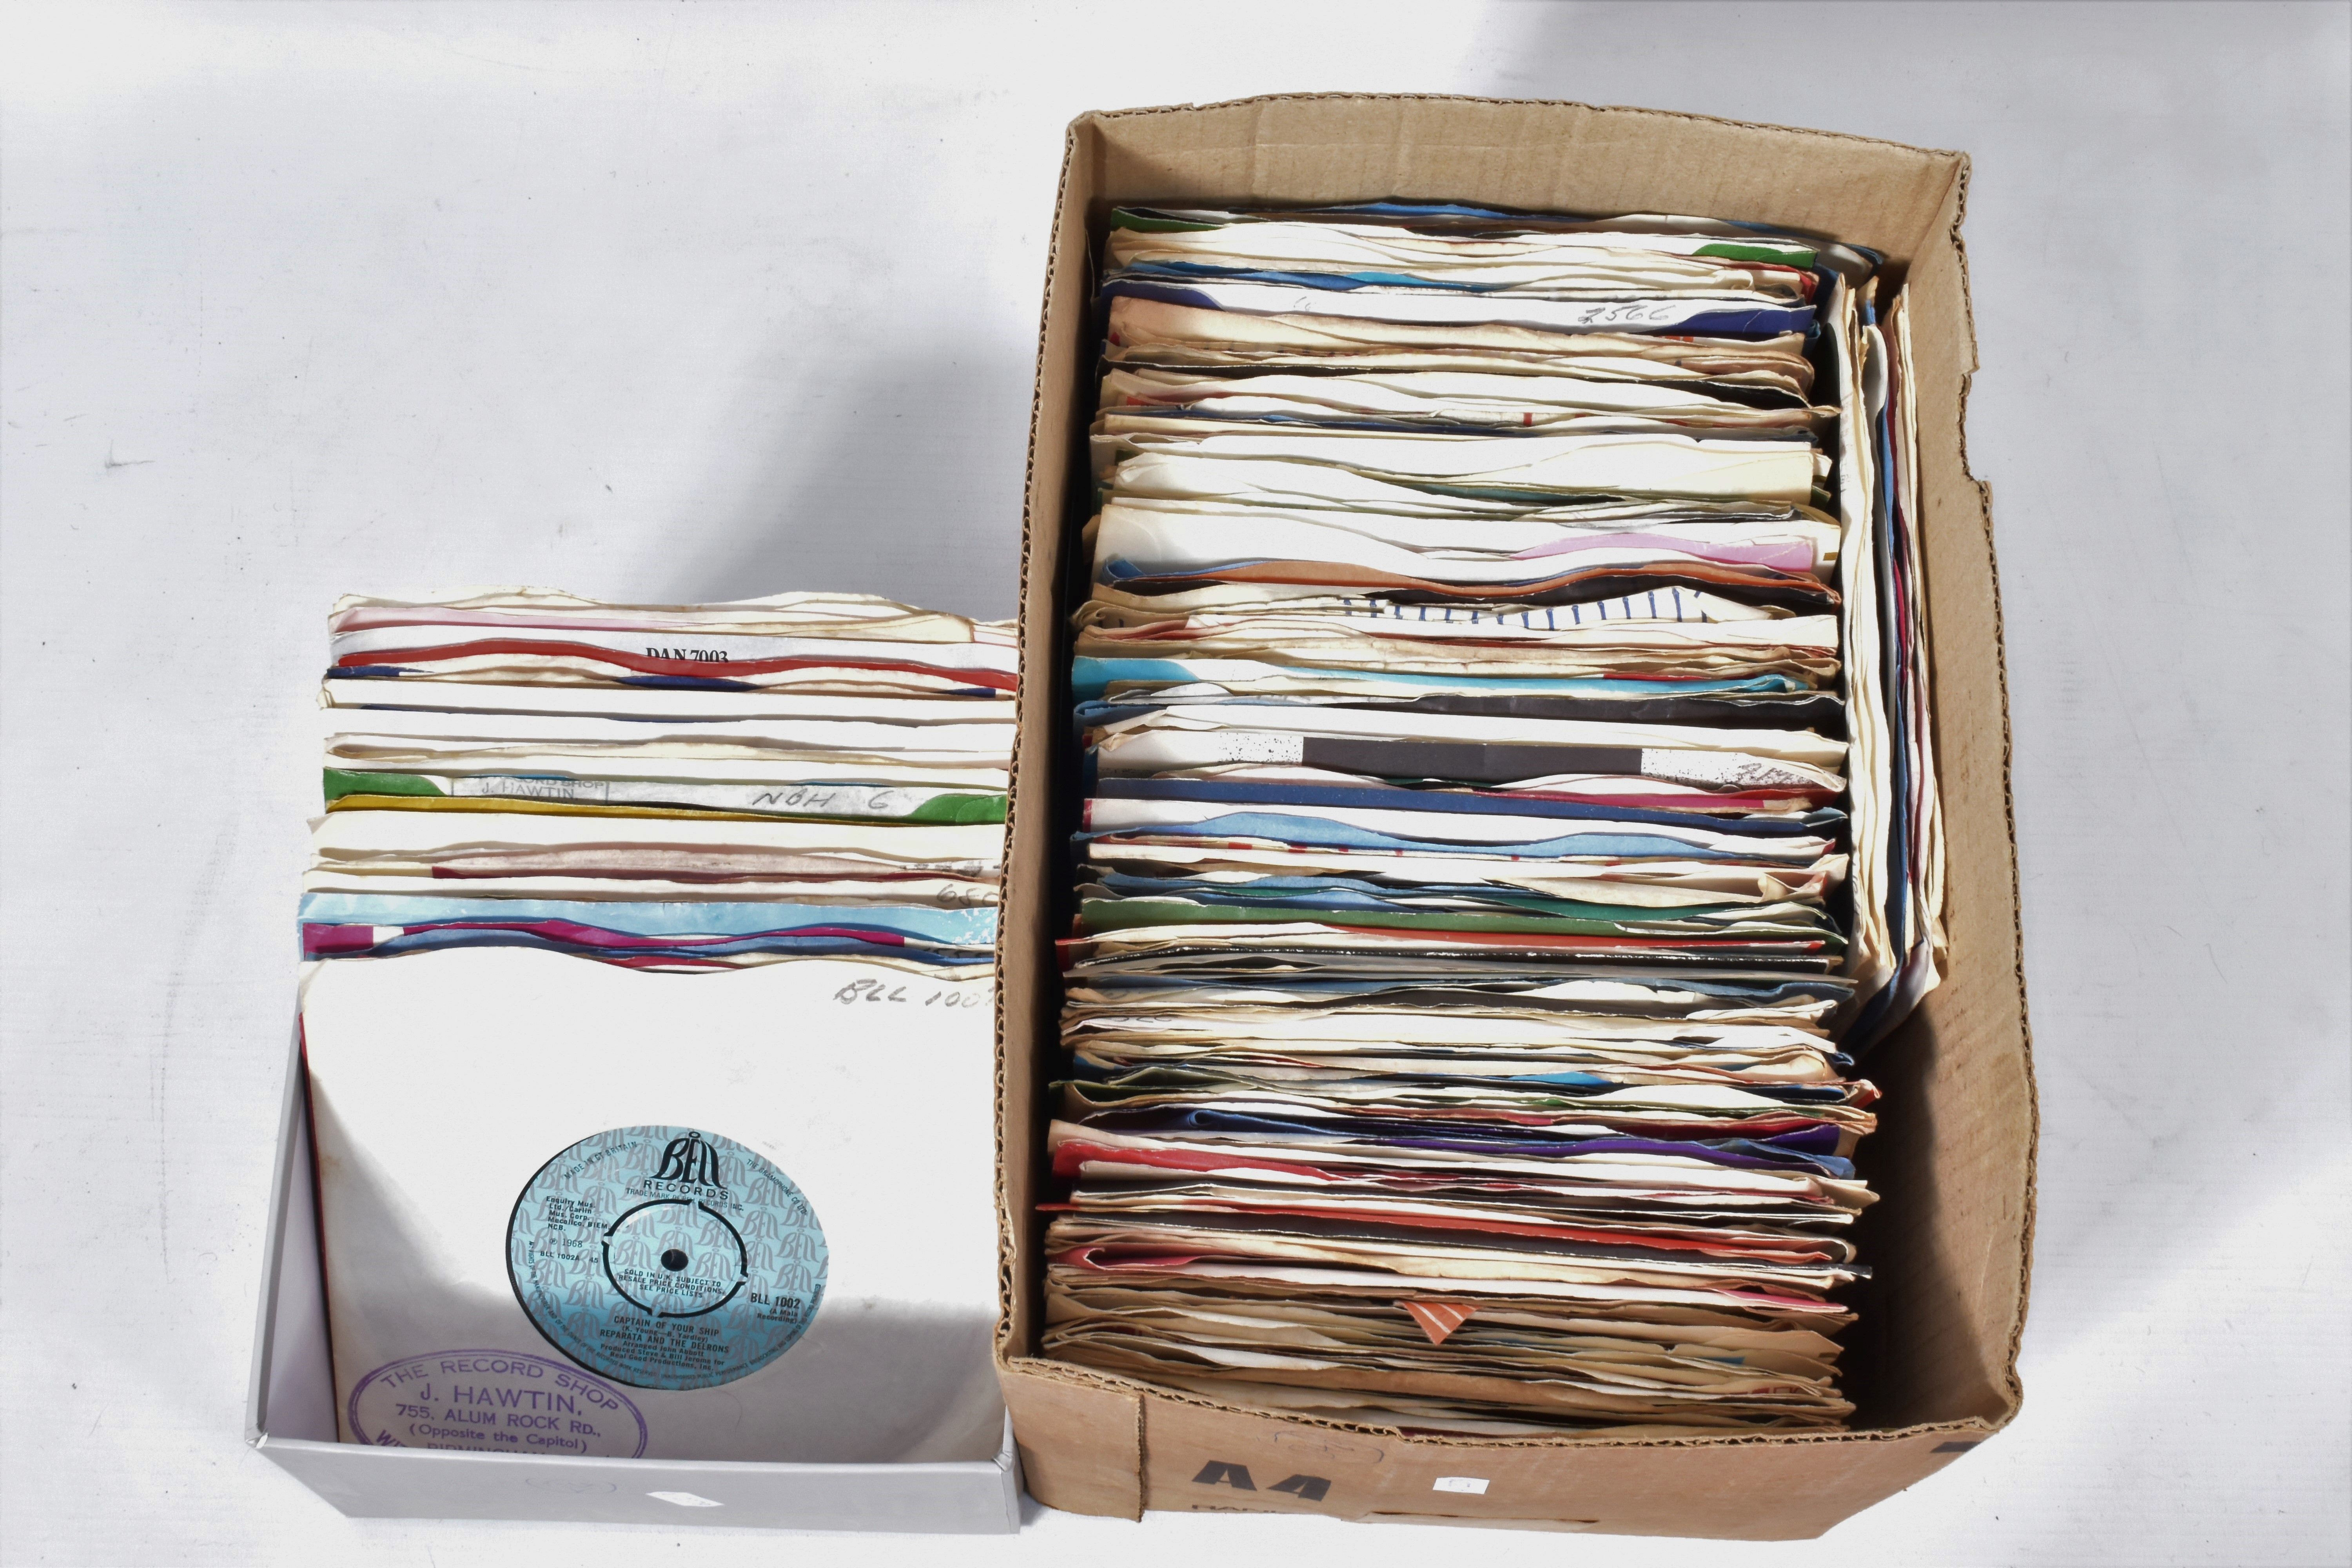 TWO TRAYS CONTAINING OVER TWO HUNDRED 7in SINGLES by artists such as The Kinks, The Beatles, The